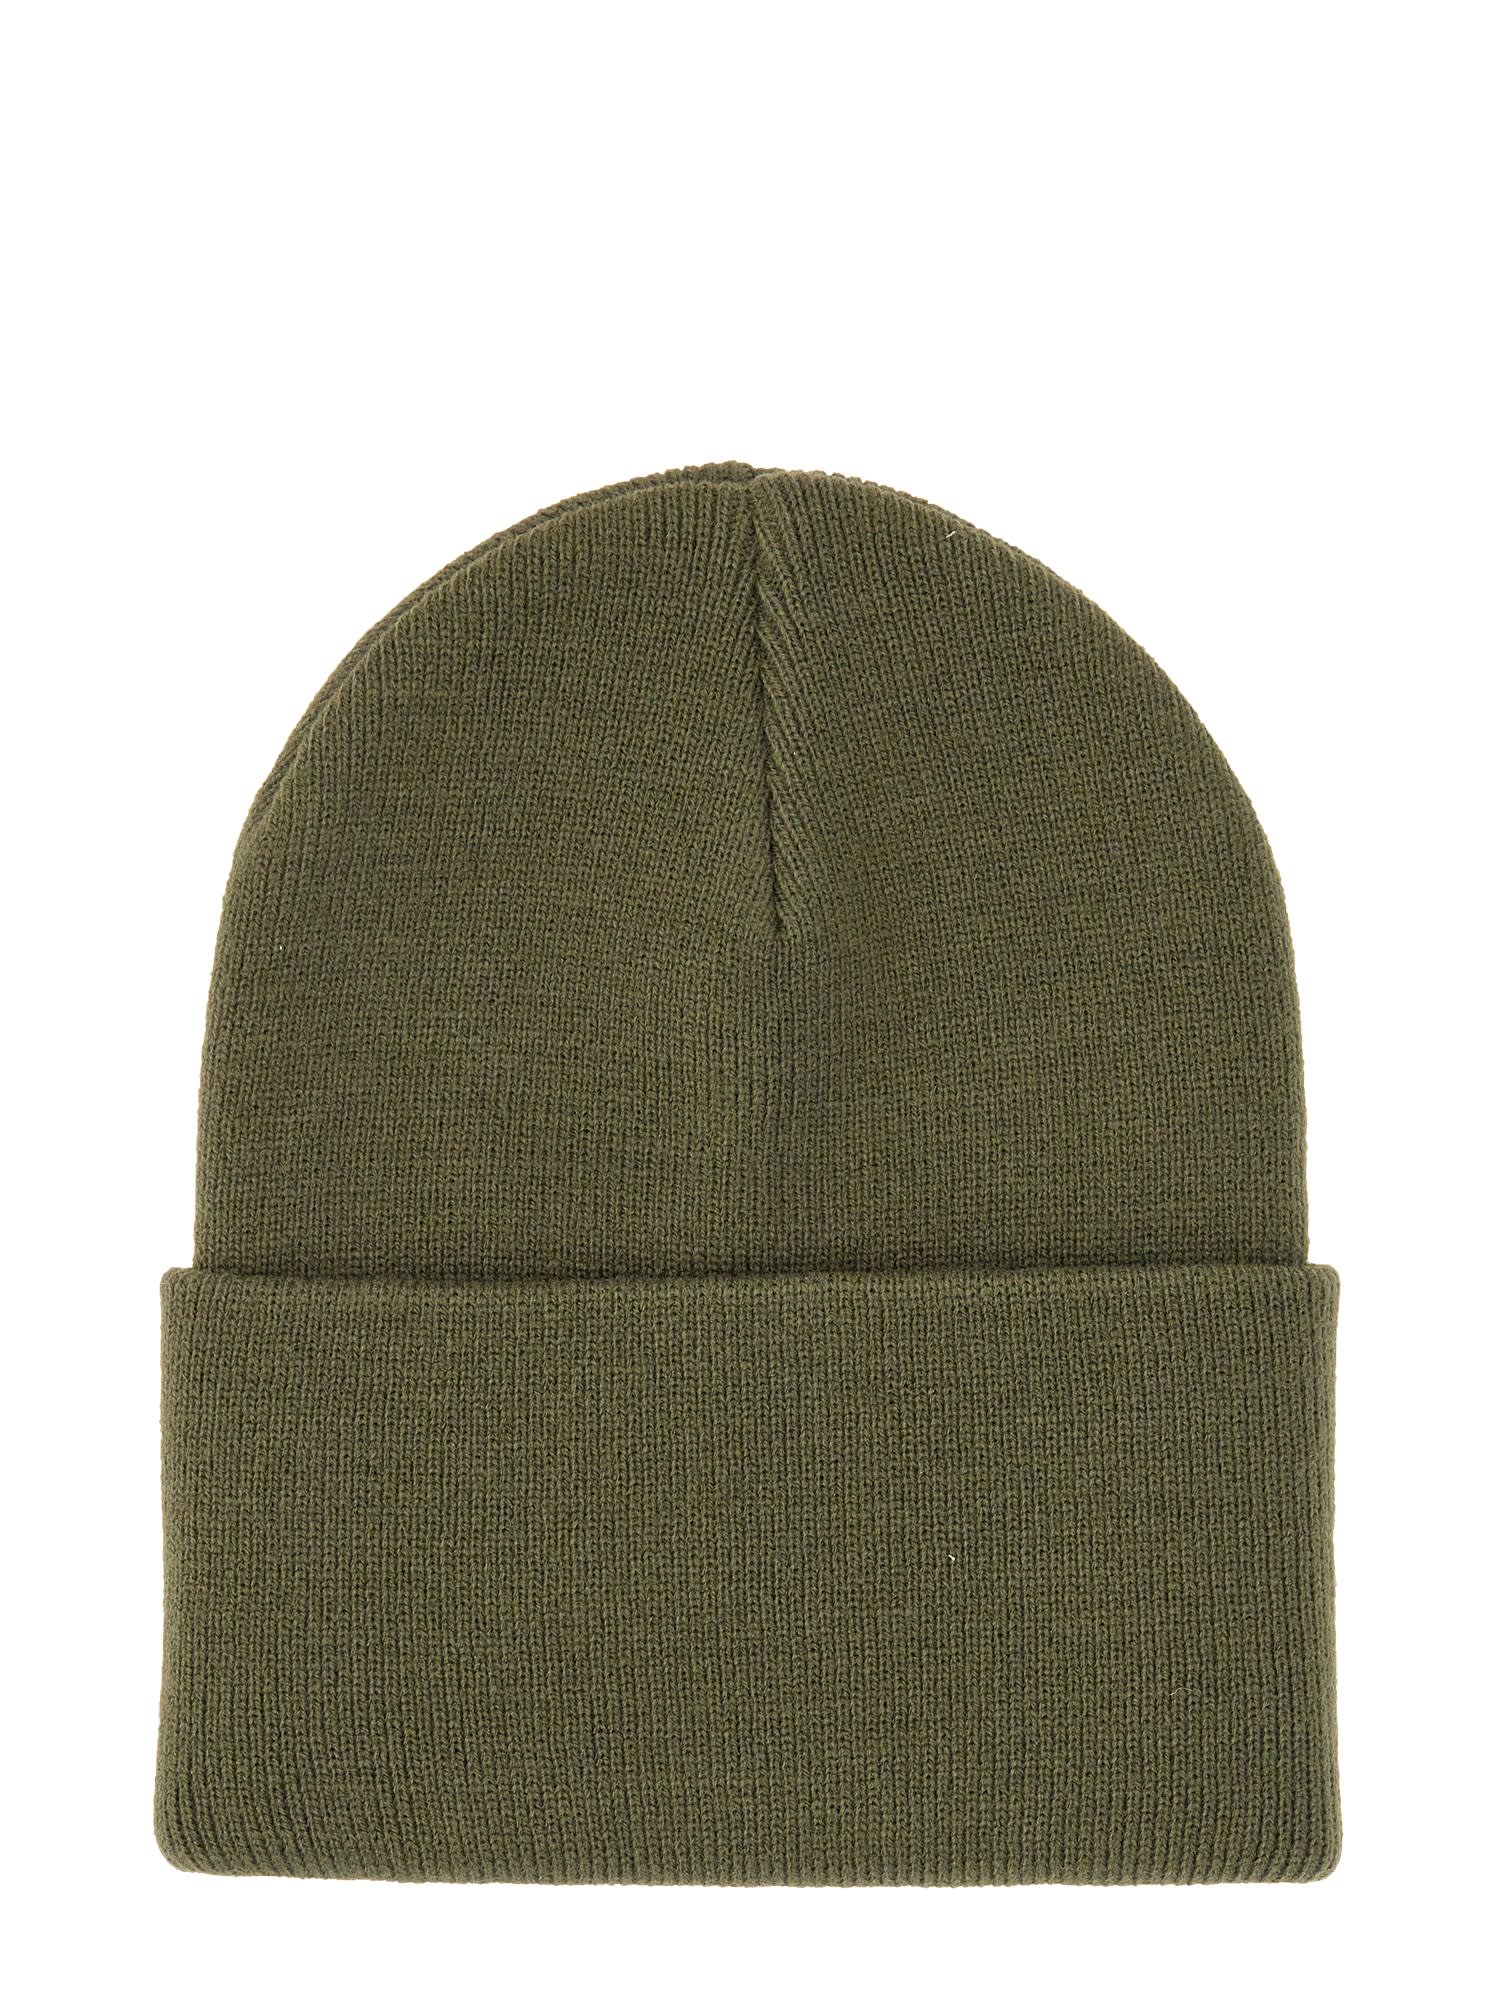 Shop Carhartt Knit Hat In Nqxx Plant